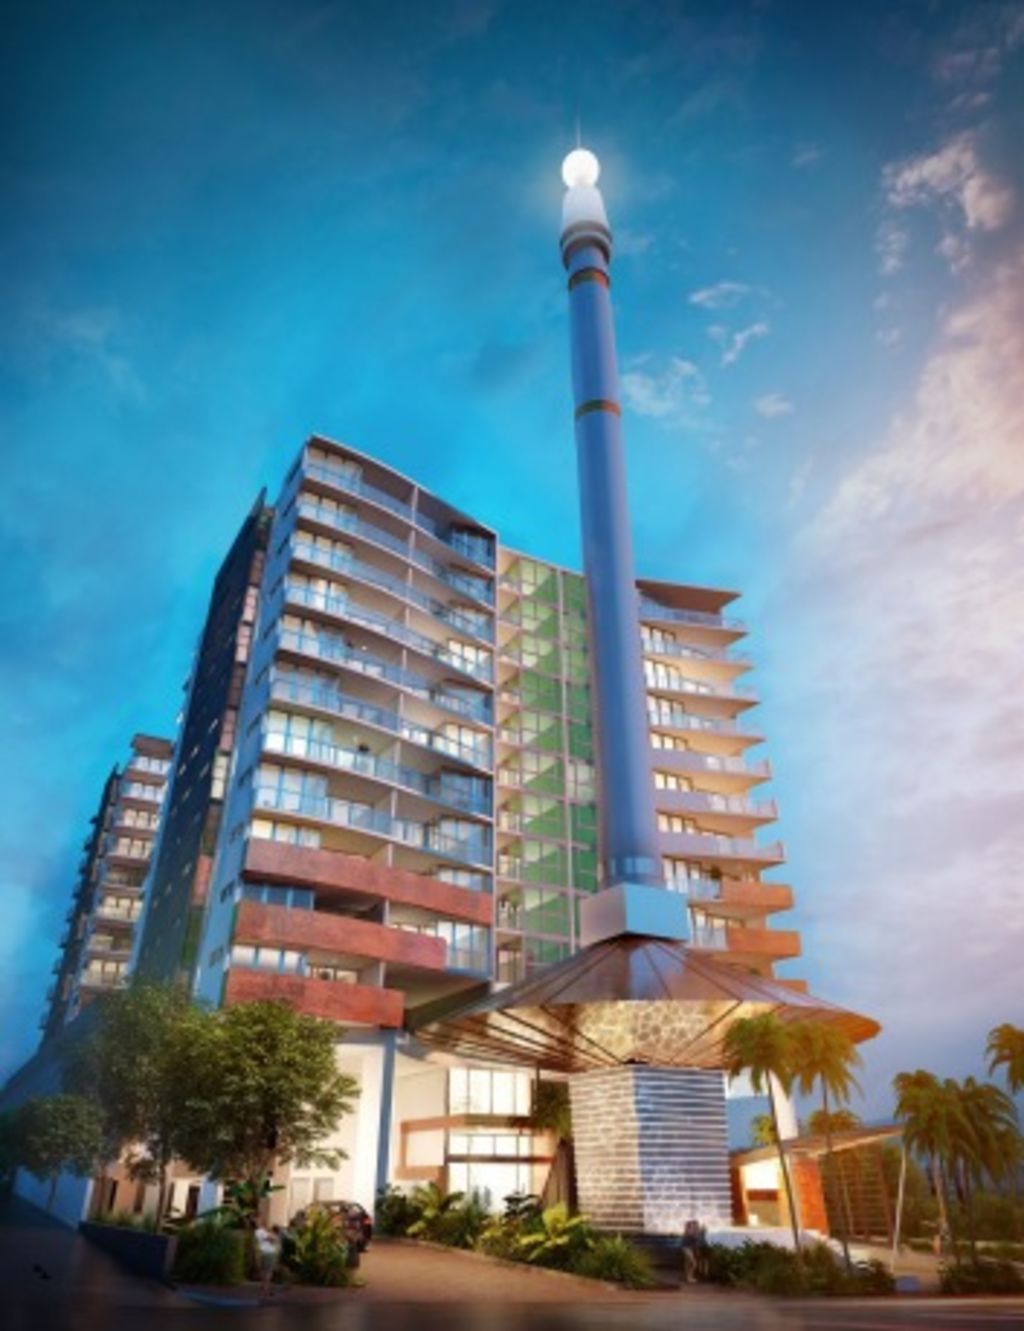 Heritage-listed Skyneedle to be focal point of new Brisbane development